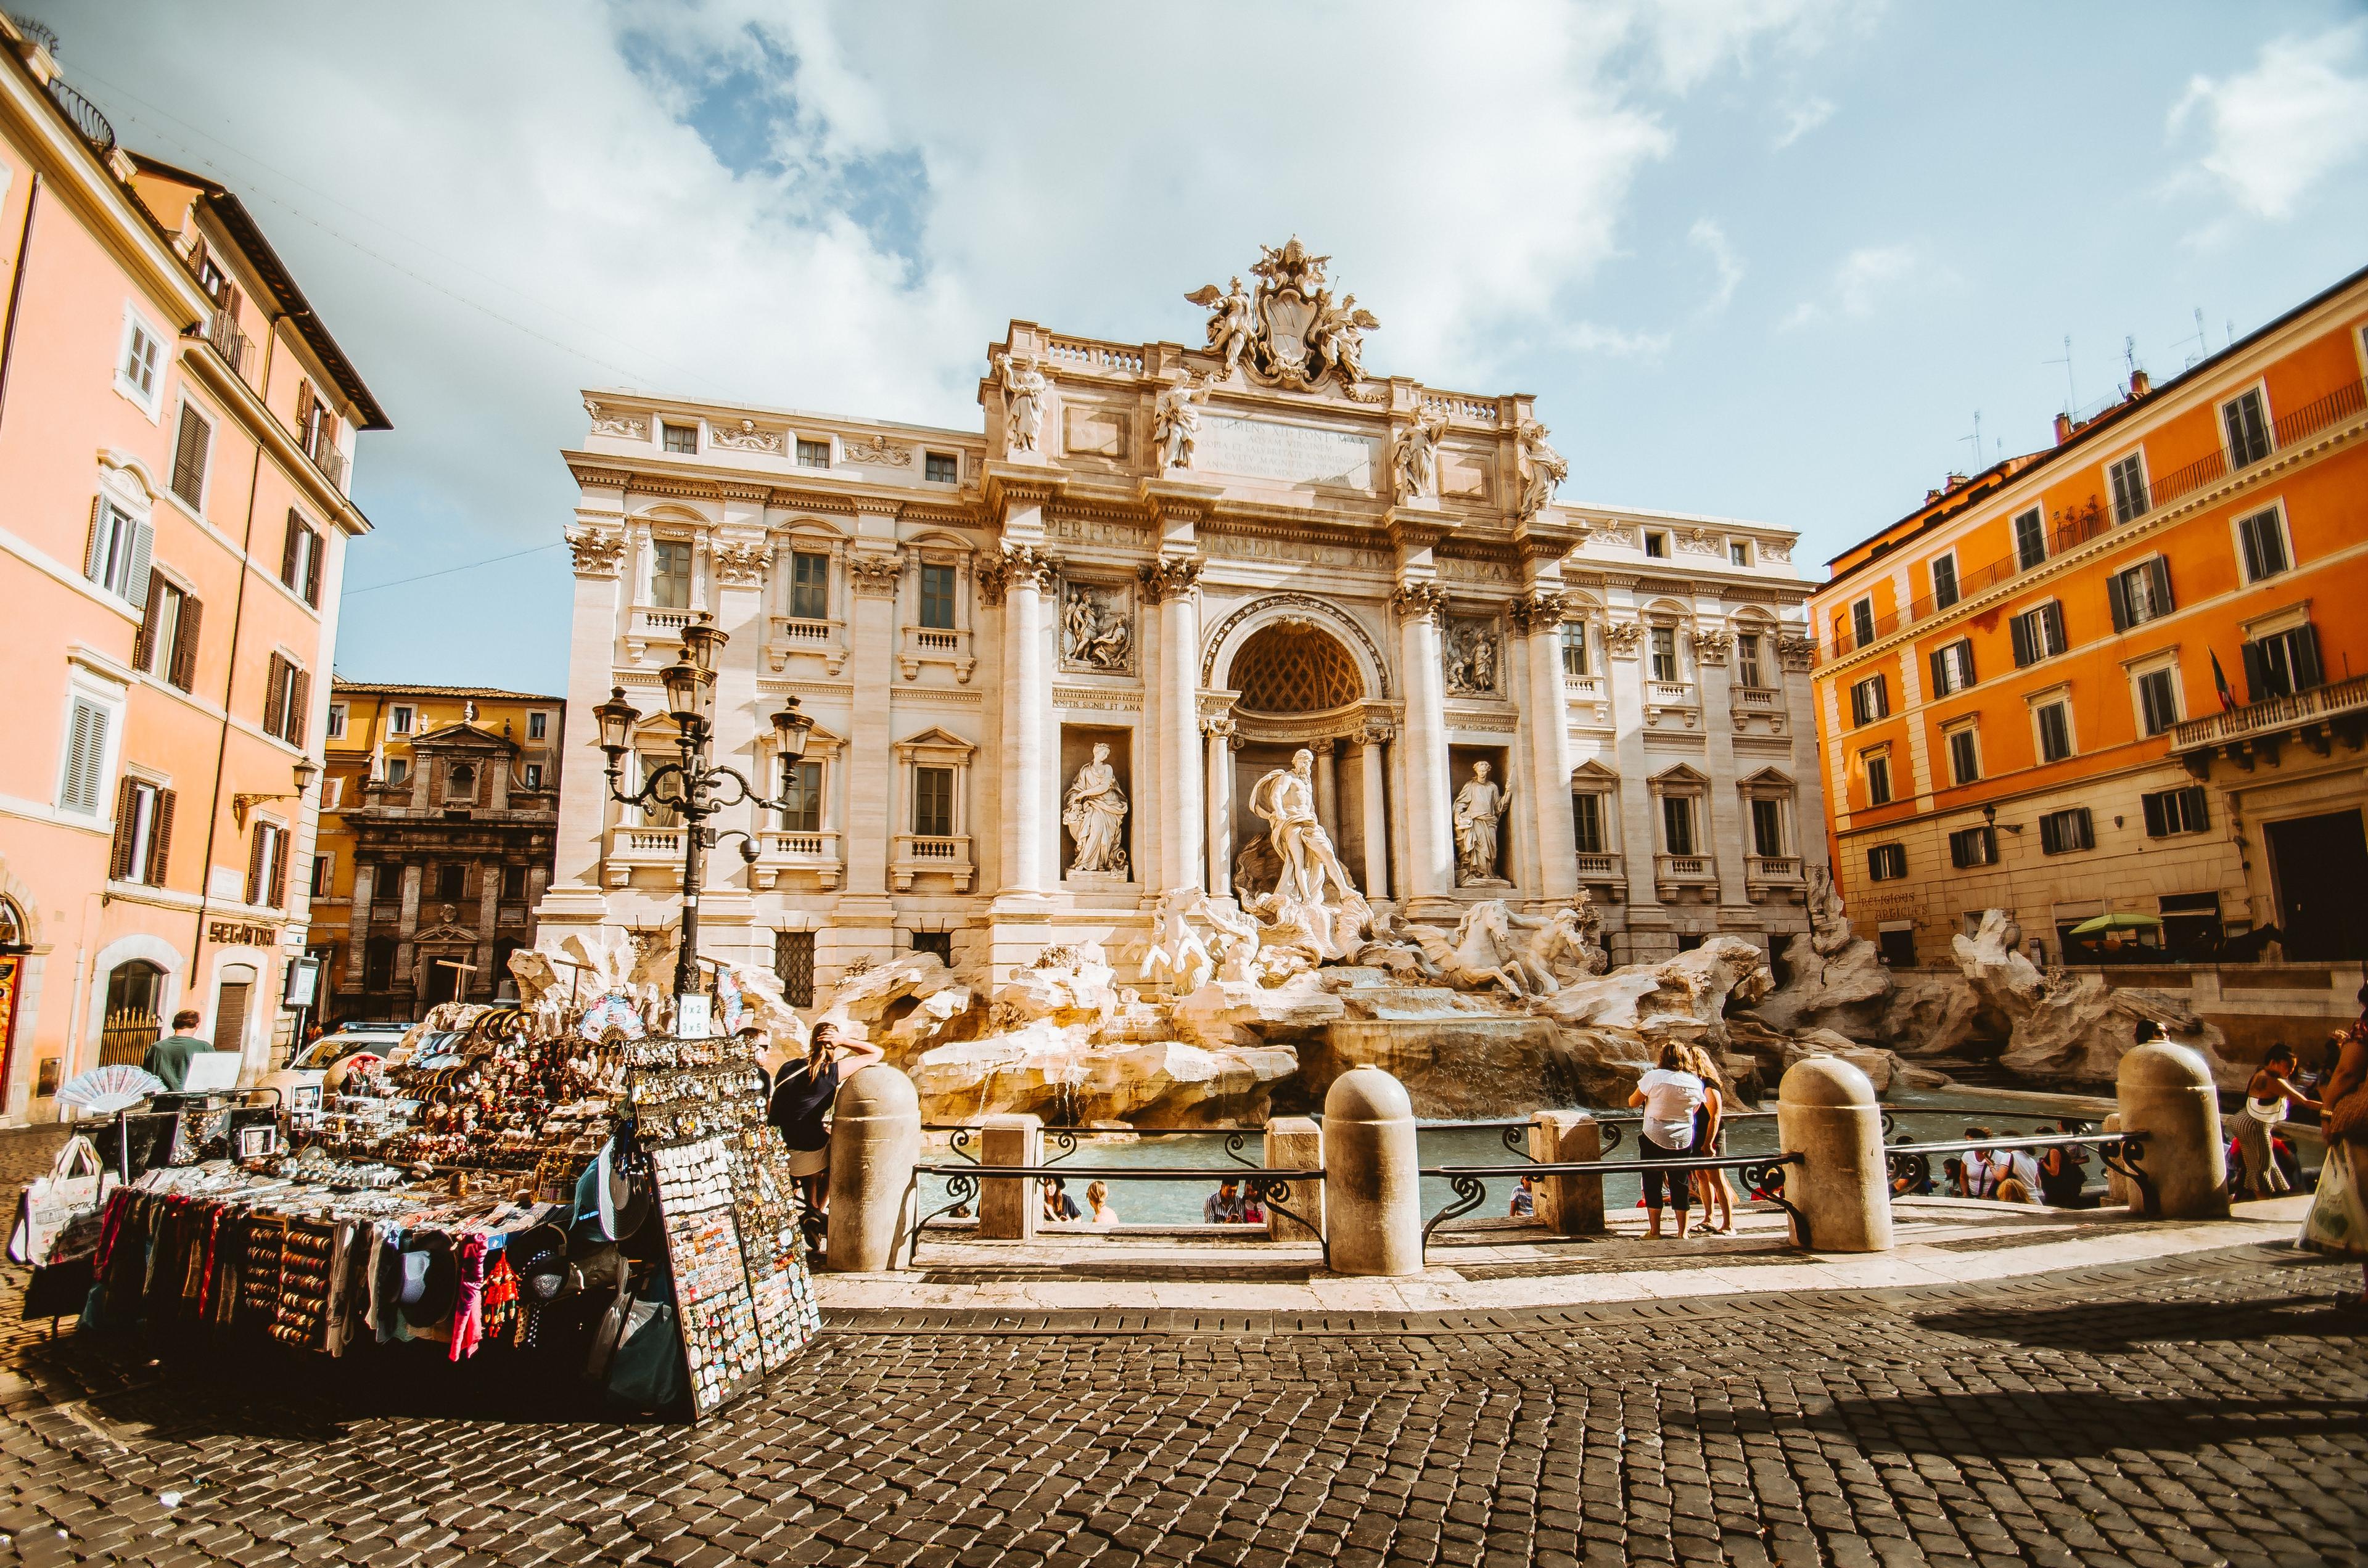 A Guide to Seeing Rome in 3 Days